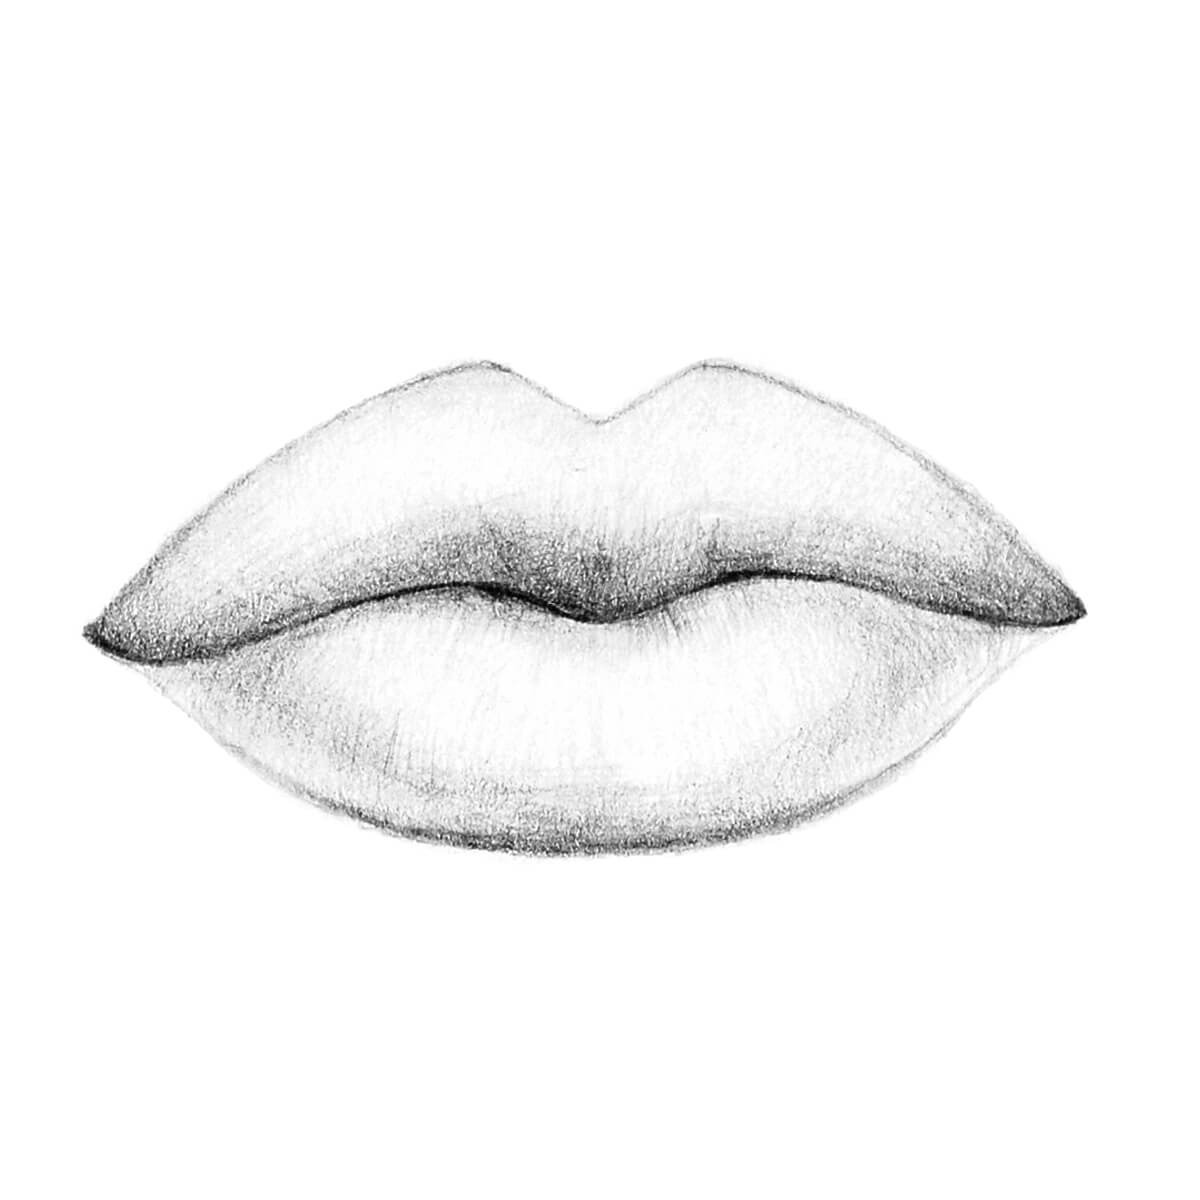 lips drawing easy - step 3